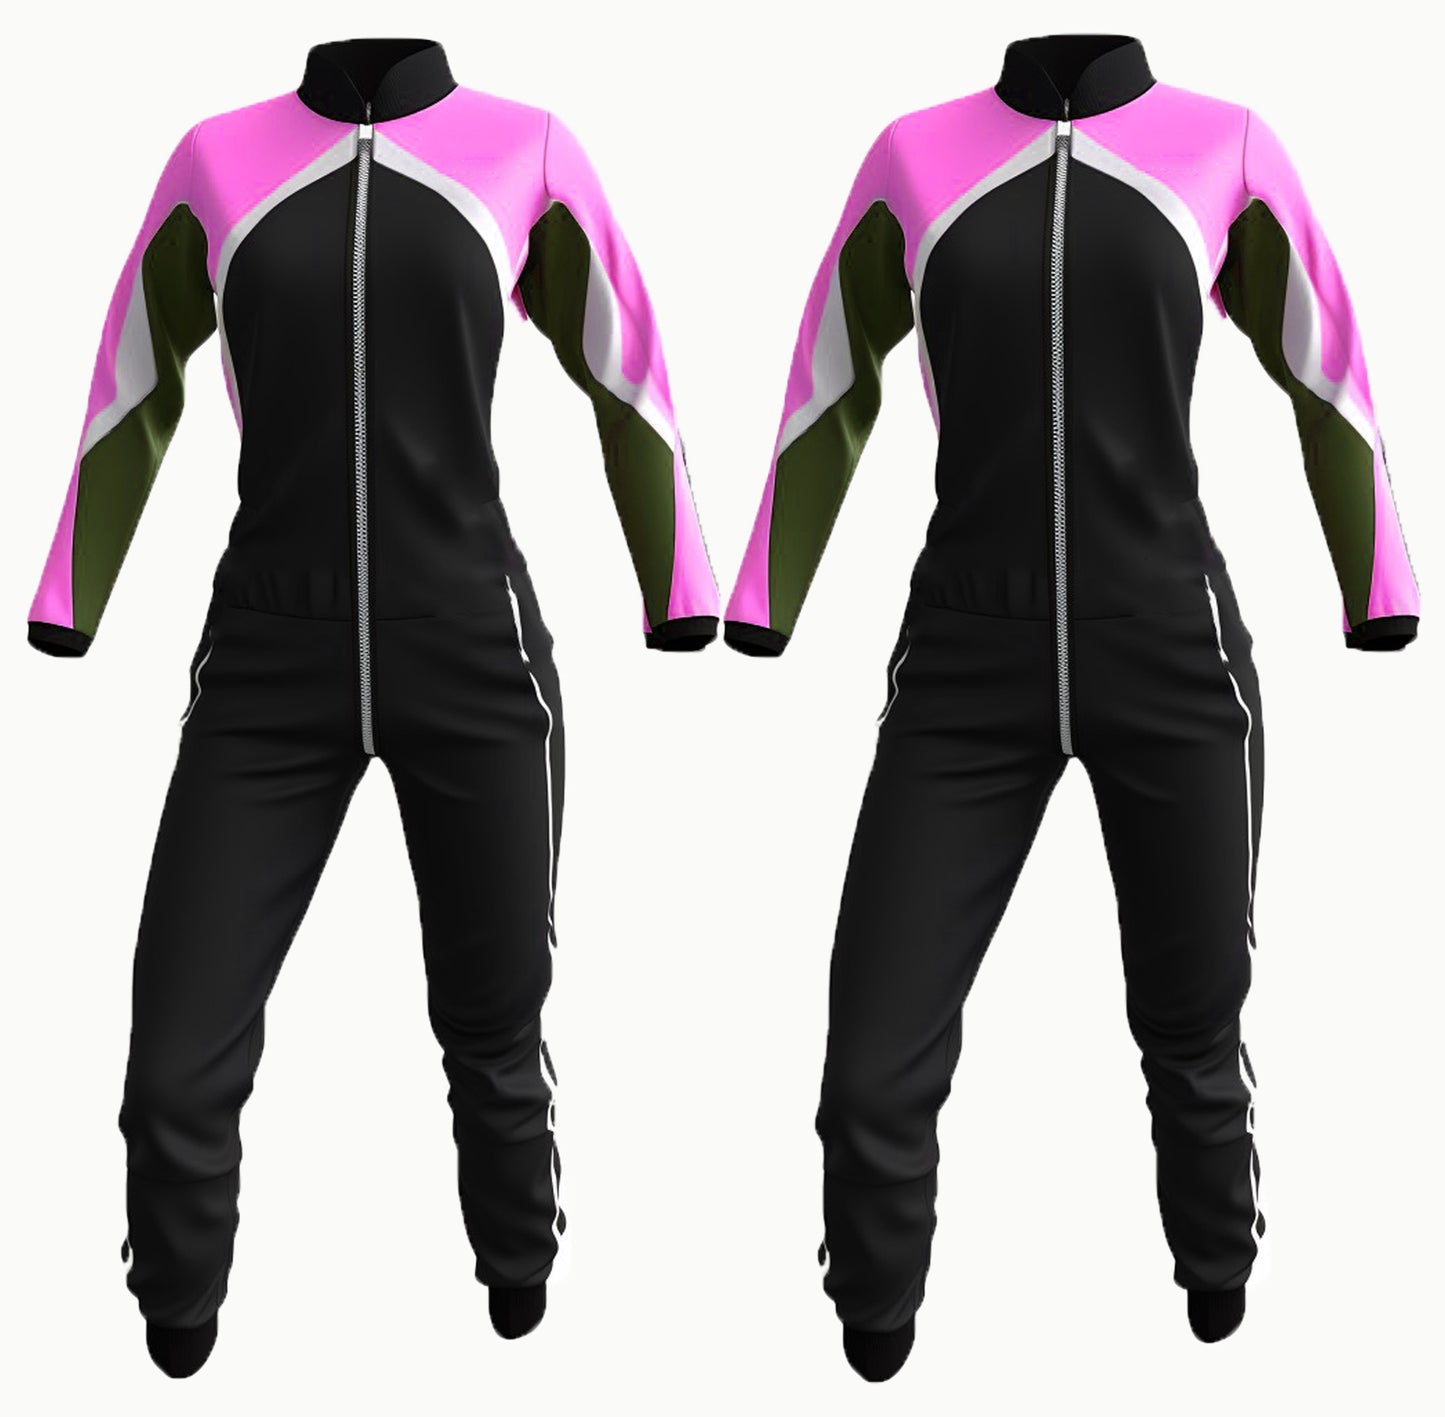 Freely /Skydiving Suit | Latest new design suit-010 | Skyexsuits